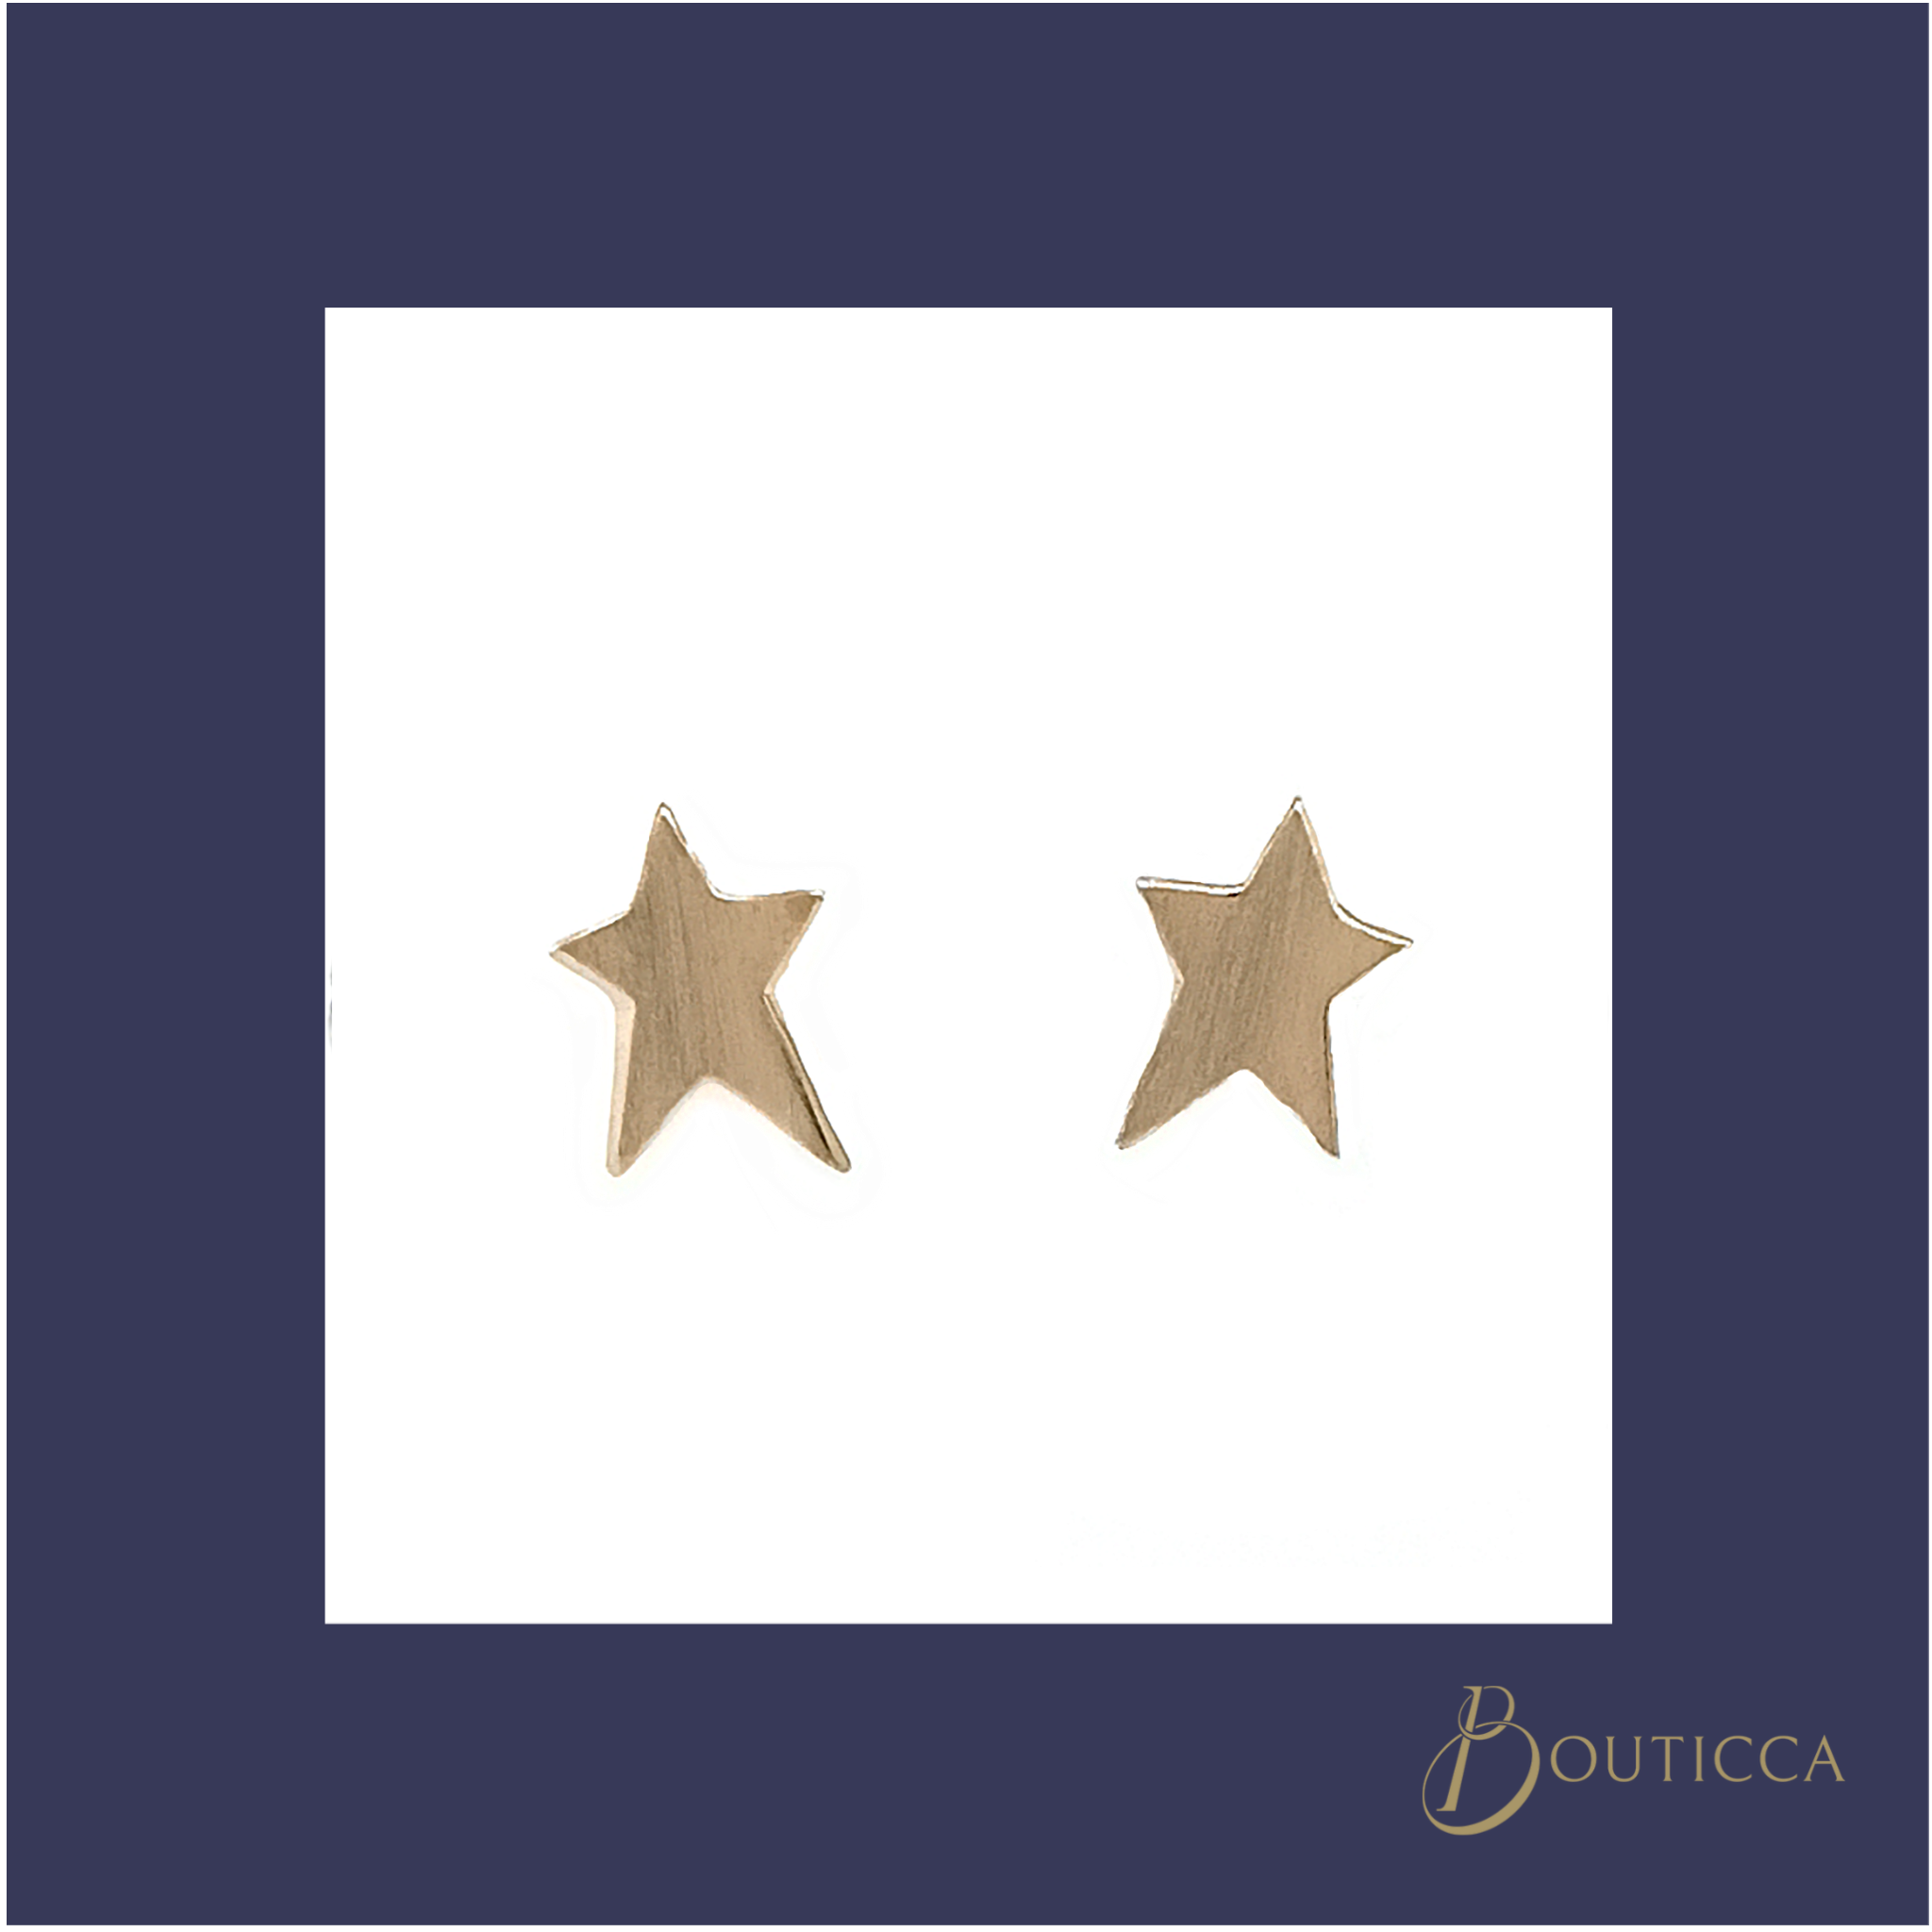 Gold Plated Star Stud Earrings with a satin finish